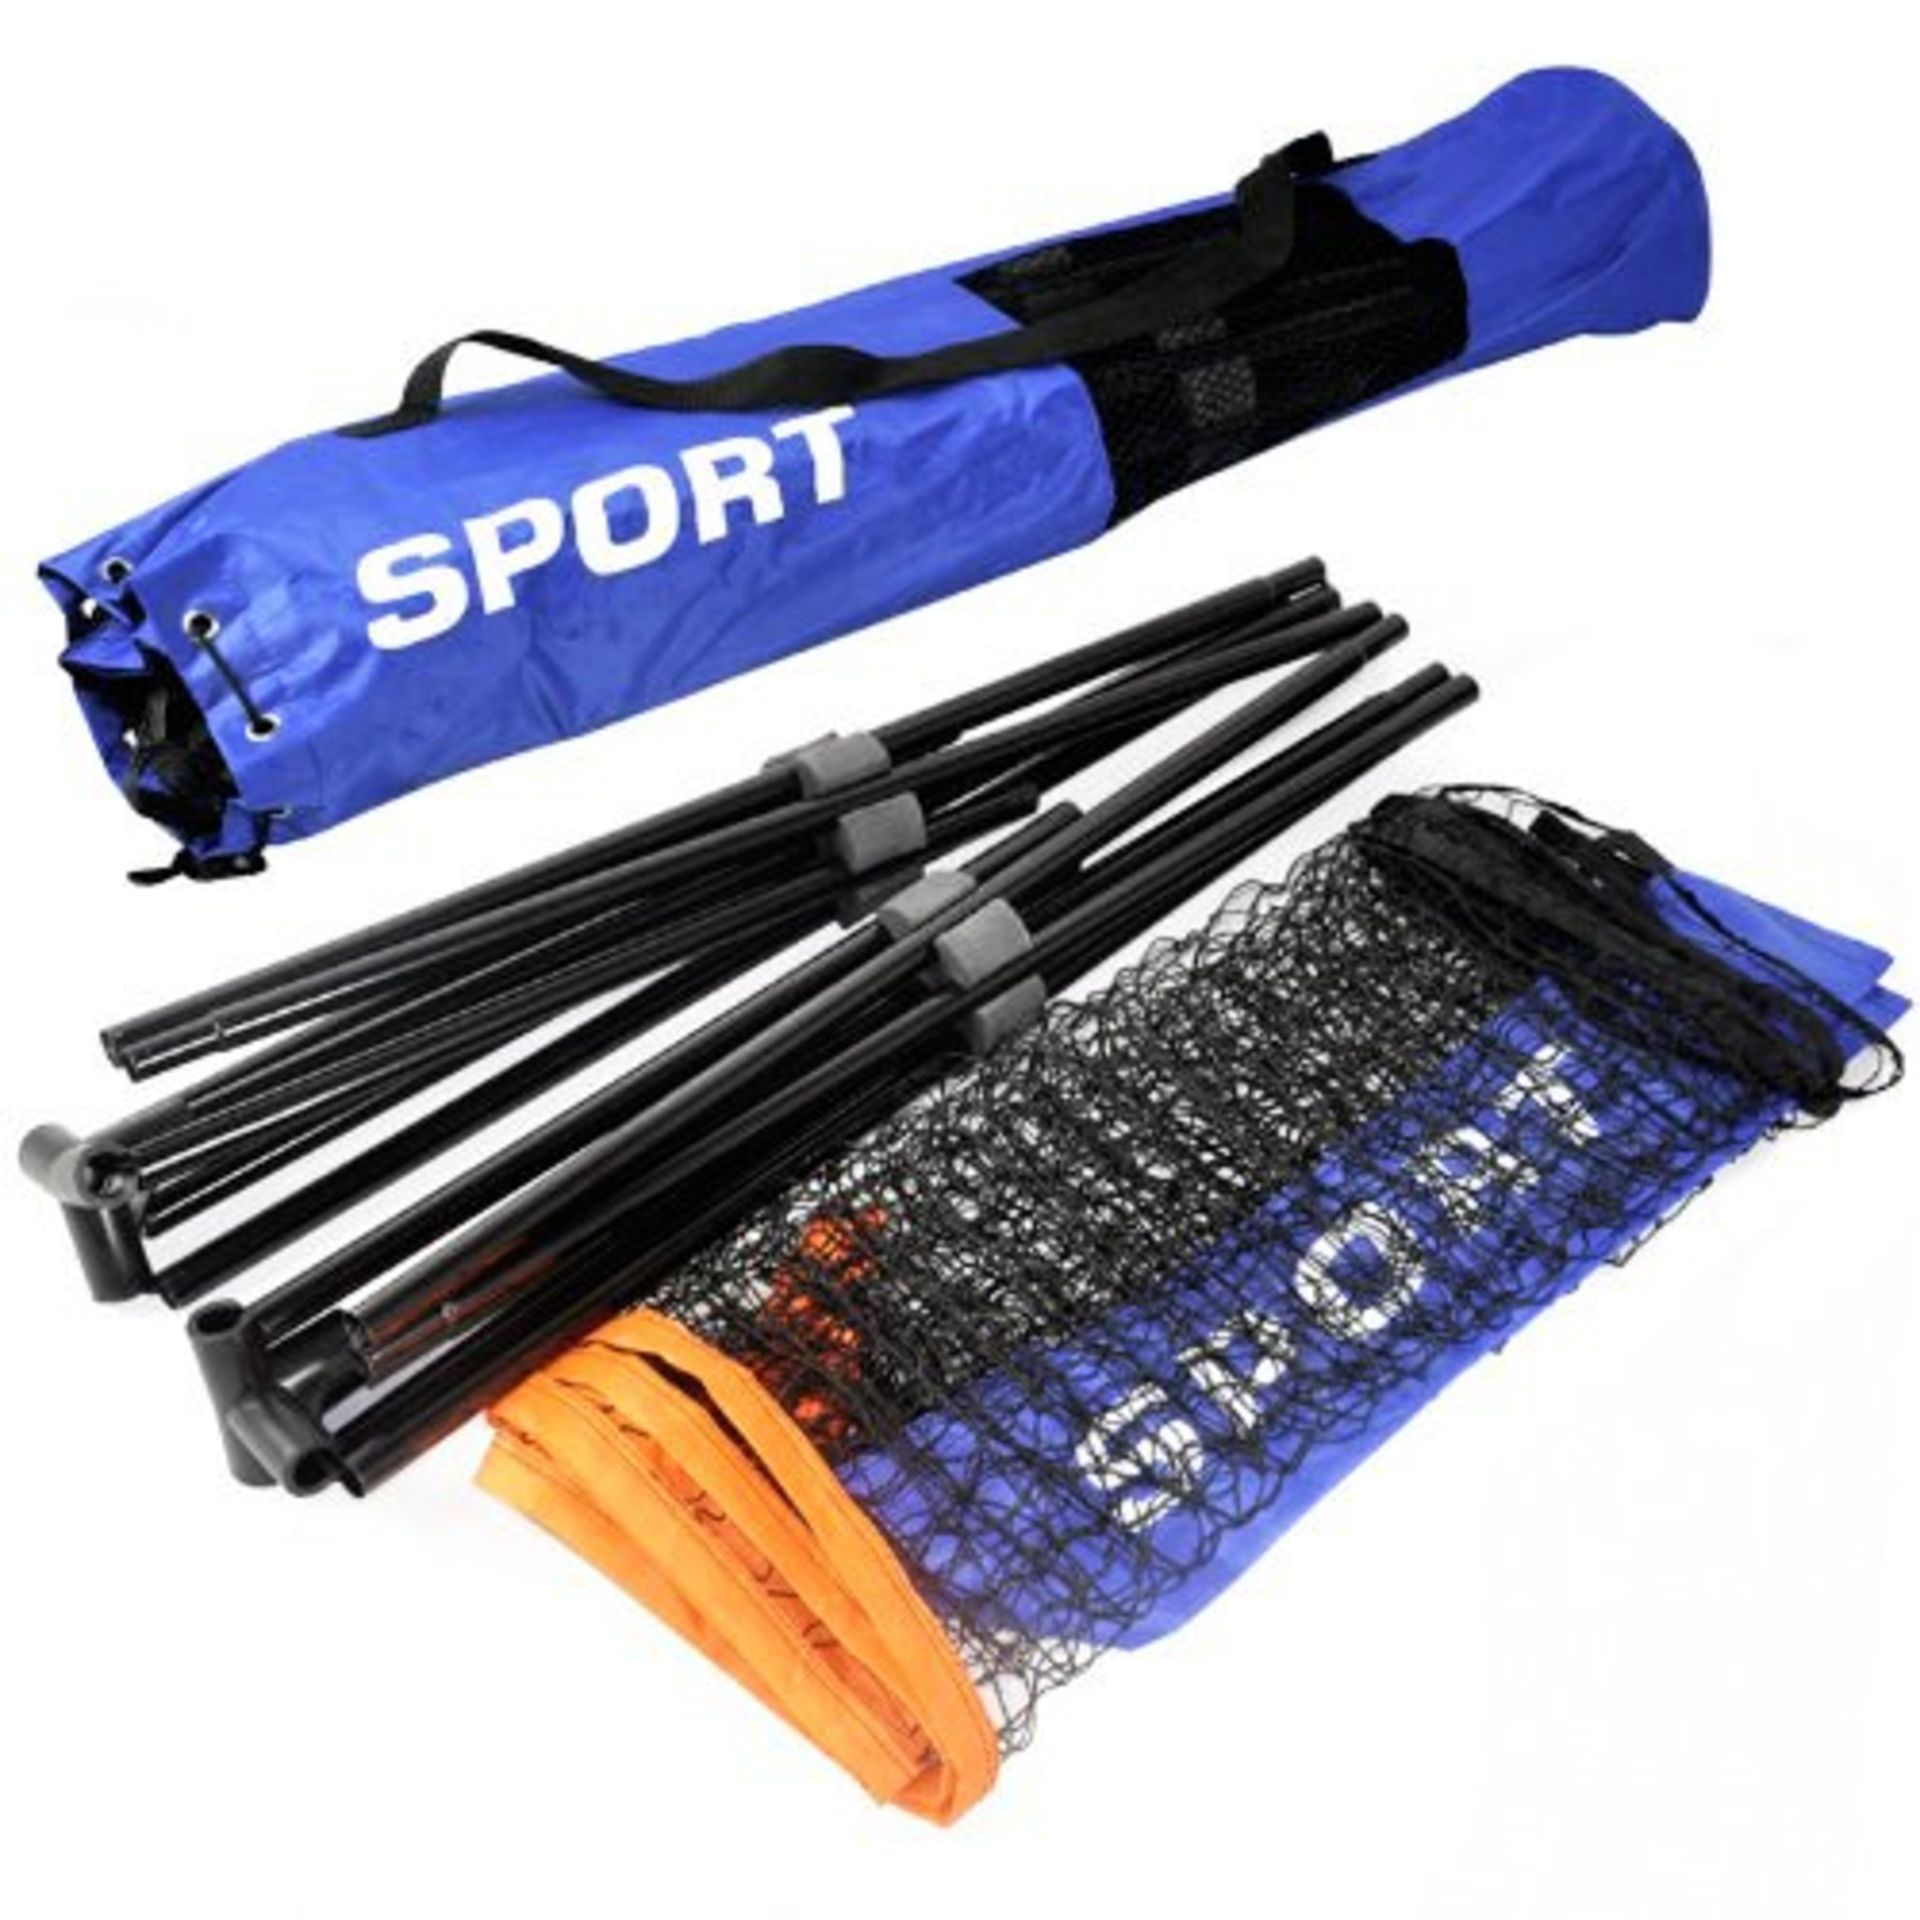 (Q62) Small 3m Adjustable Foldable Badminton Tennis Volleyball NetSmall 3m Easy Fold Out Asse... - Image 3 of 3